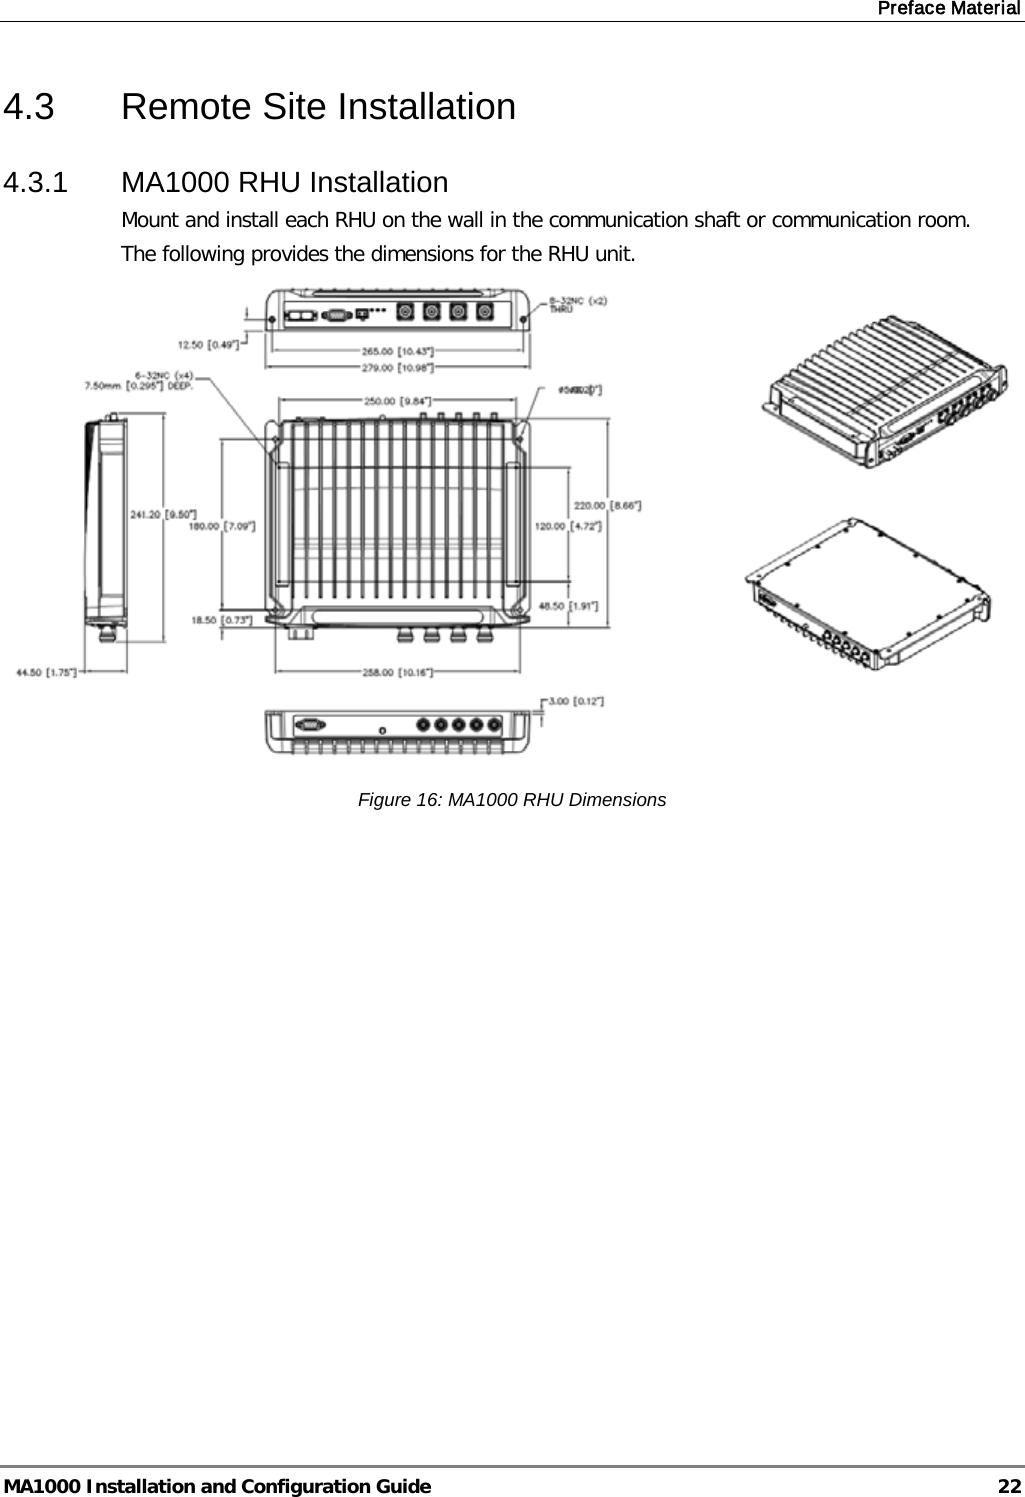 Preface Material  MA1000 Installation and Configuration Guide  22 4.3  Remote Site Installation 4.3.1  MA1000 RHU Installation  Mount and install each RHU on the wall in the communication shaft or communication room. The following provides the dimensions for the RHU unit.   Figure 16: MA1000 RHU Dimensions    